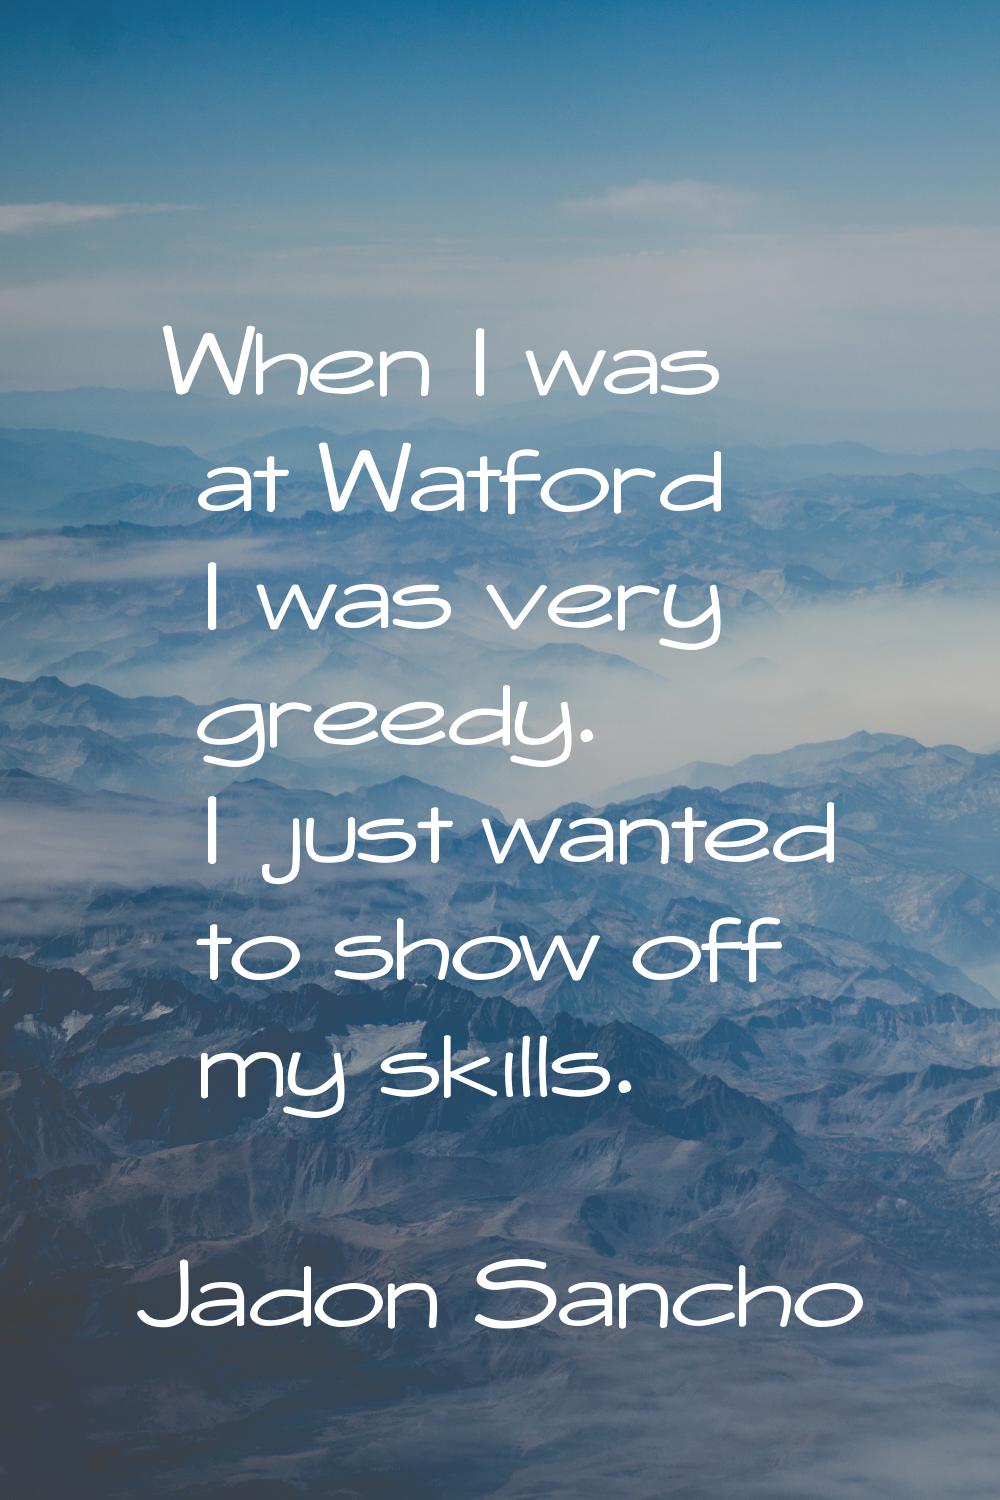 When I was at Watford I was very greedy. I just wanted to show off my skills.